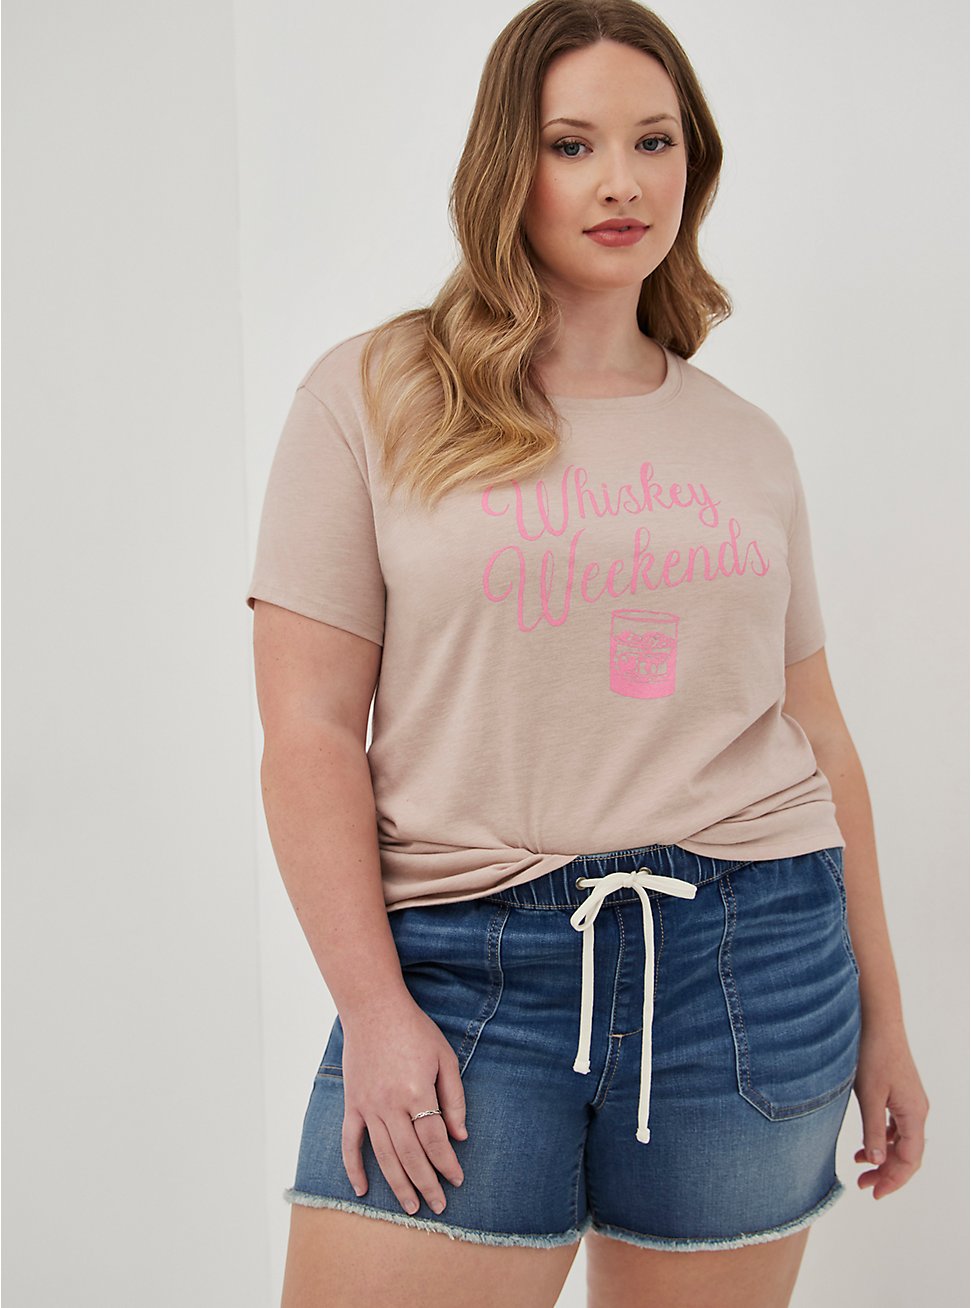 Plus Size Relaxed Tee - Signature Jersey Whiskey Weekends Tan, MUSHROOM, hi-res